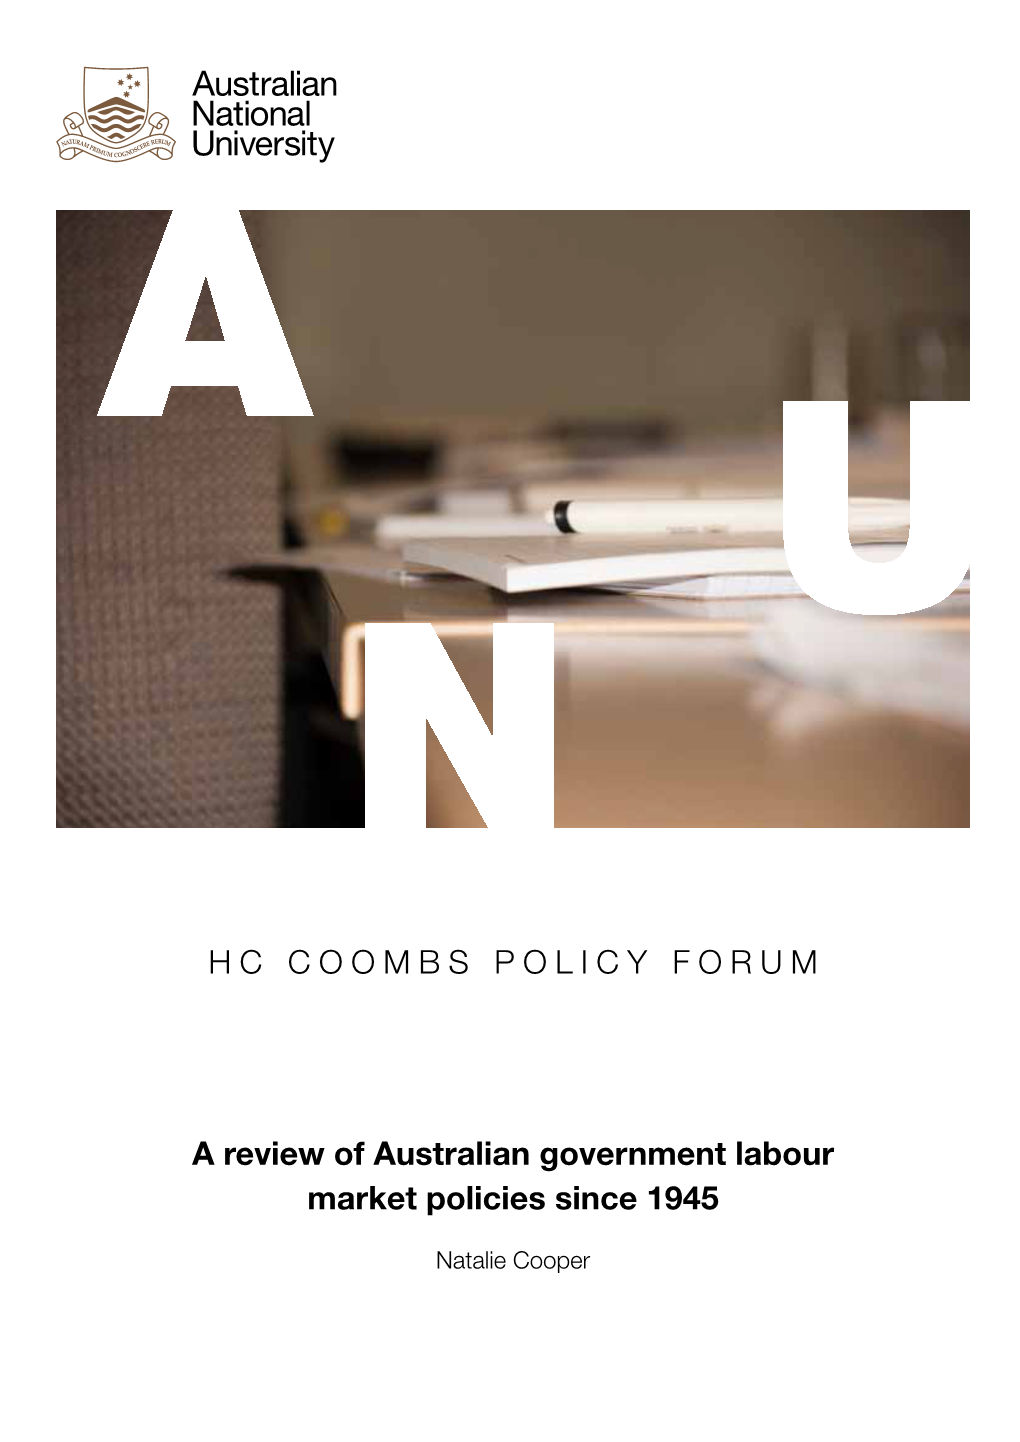 HC Coombs Policy Forum a Review of Australian Government Labour